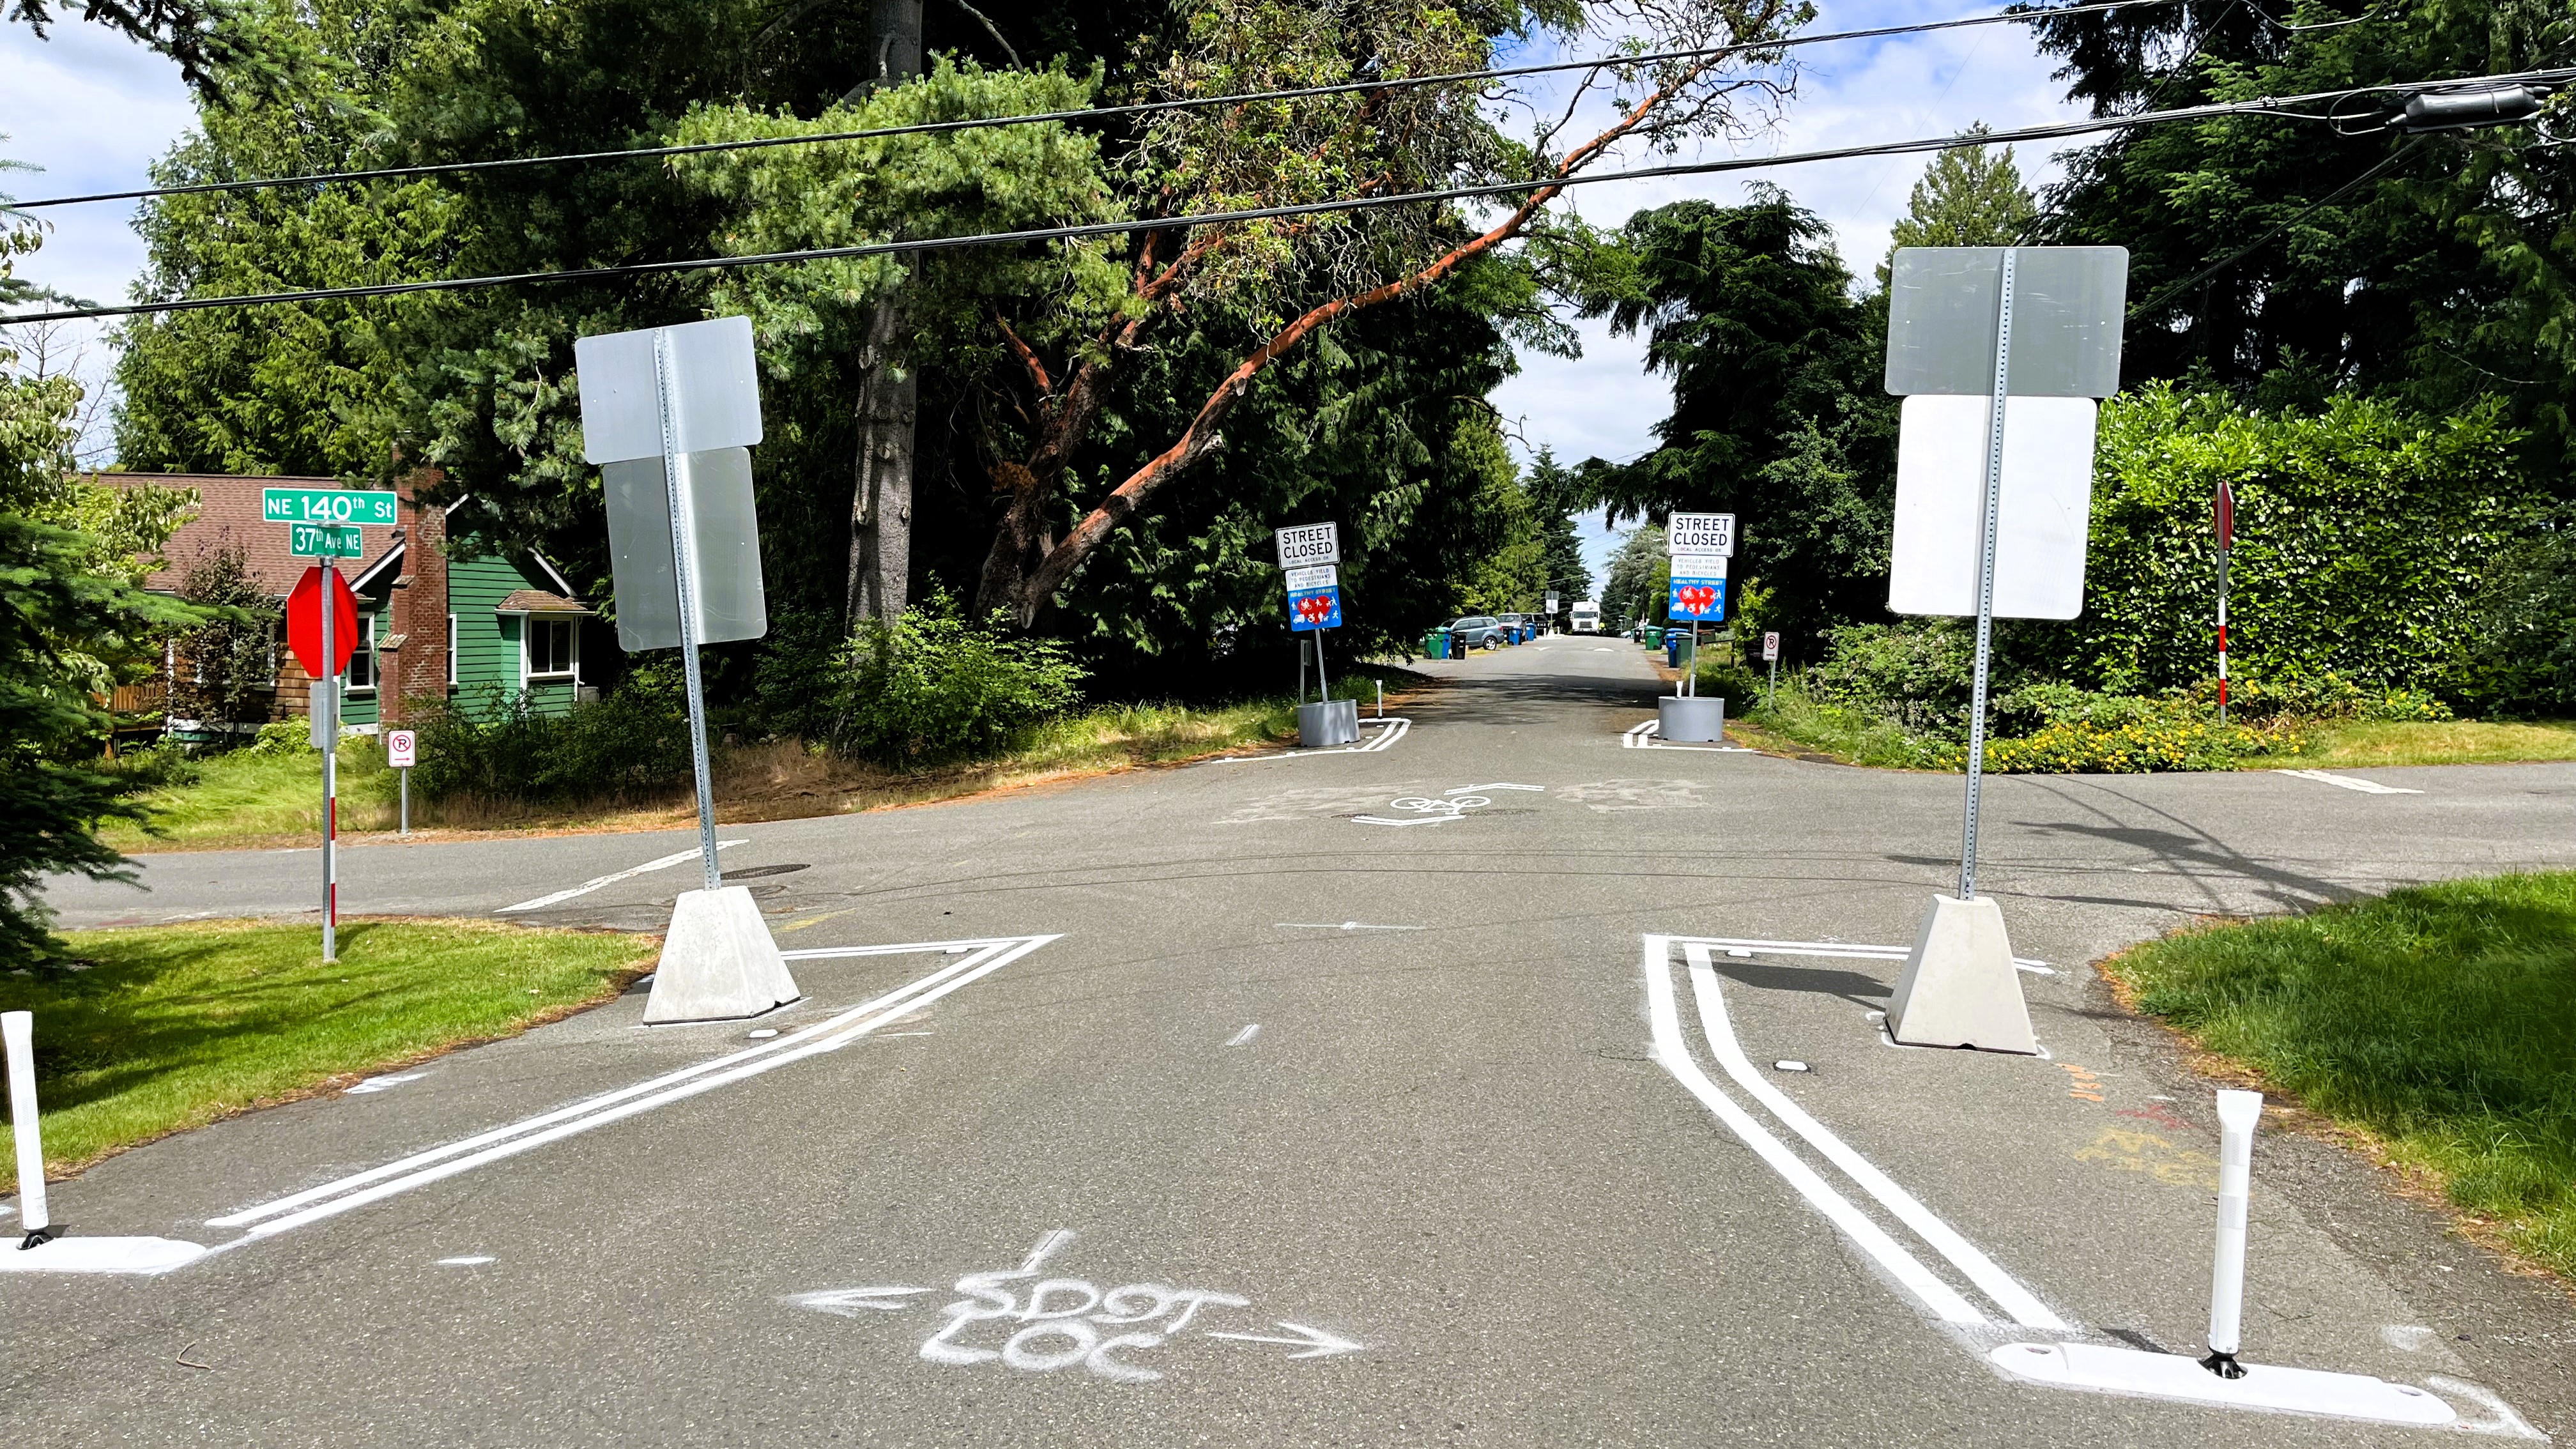 Newly installed permanent Healthy Street signage and bicycle sharrows on the Cedar Park Healthy Street